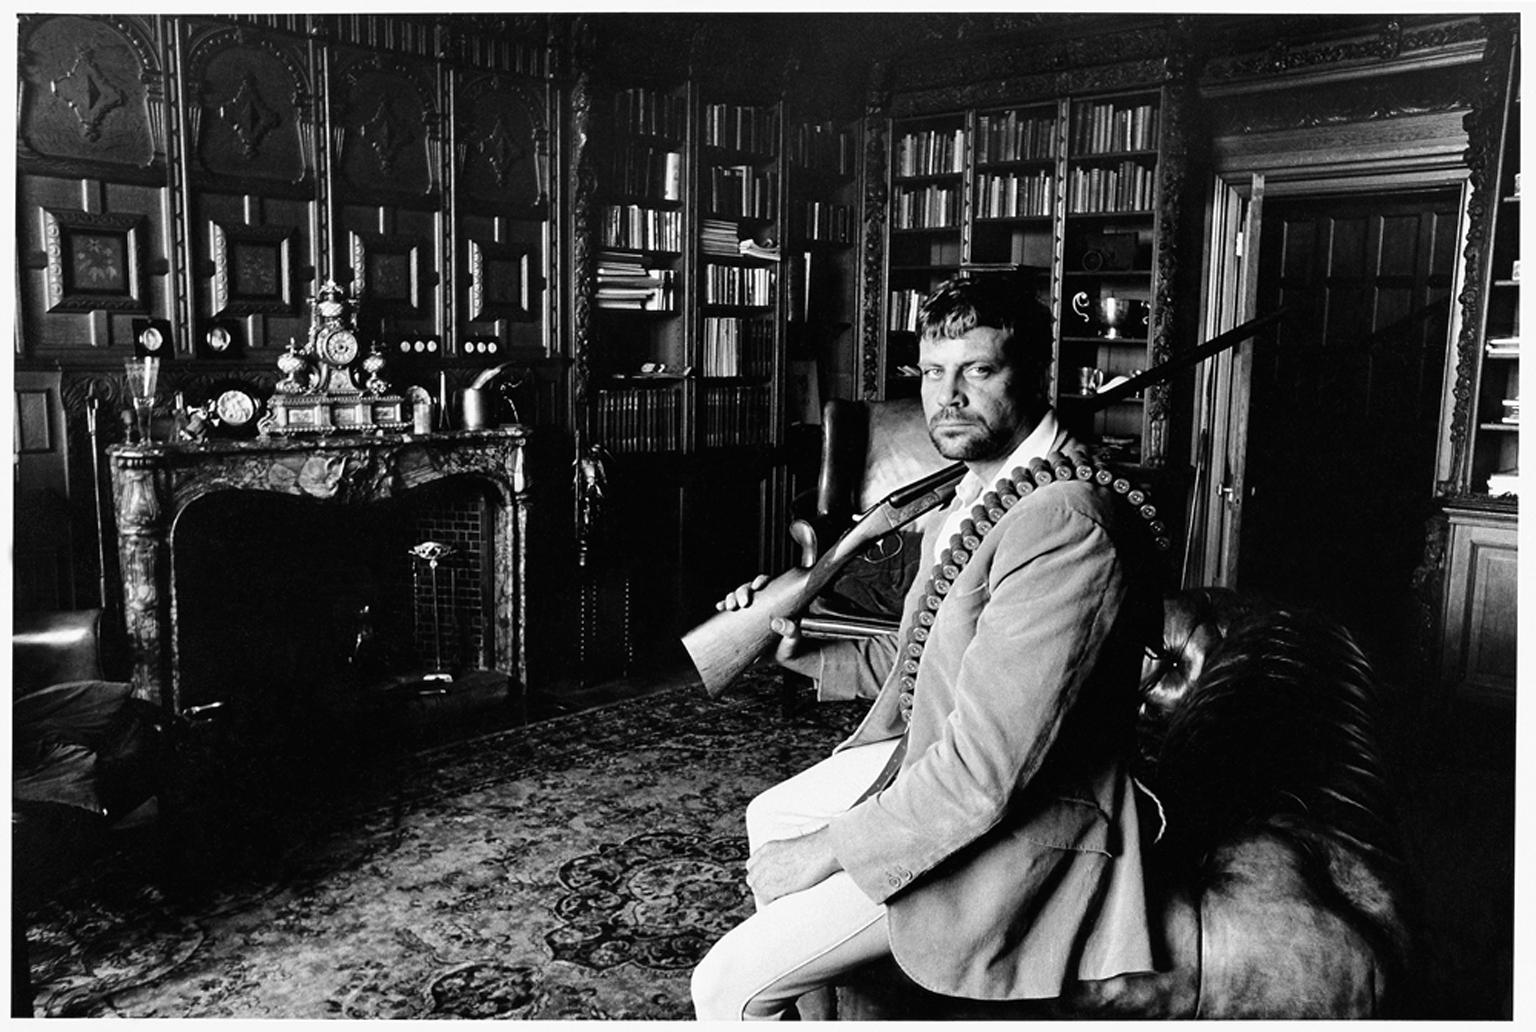 David Steen Portrait Photograph - Oliver Reed - 20th Century Photography, Films, Actor, Gladiator, Hollywood